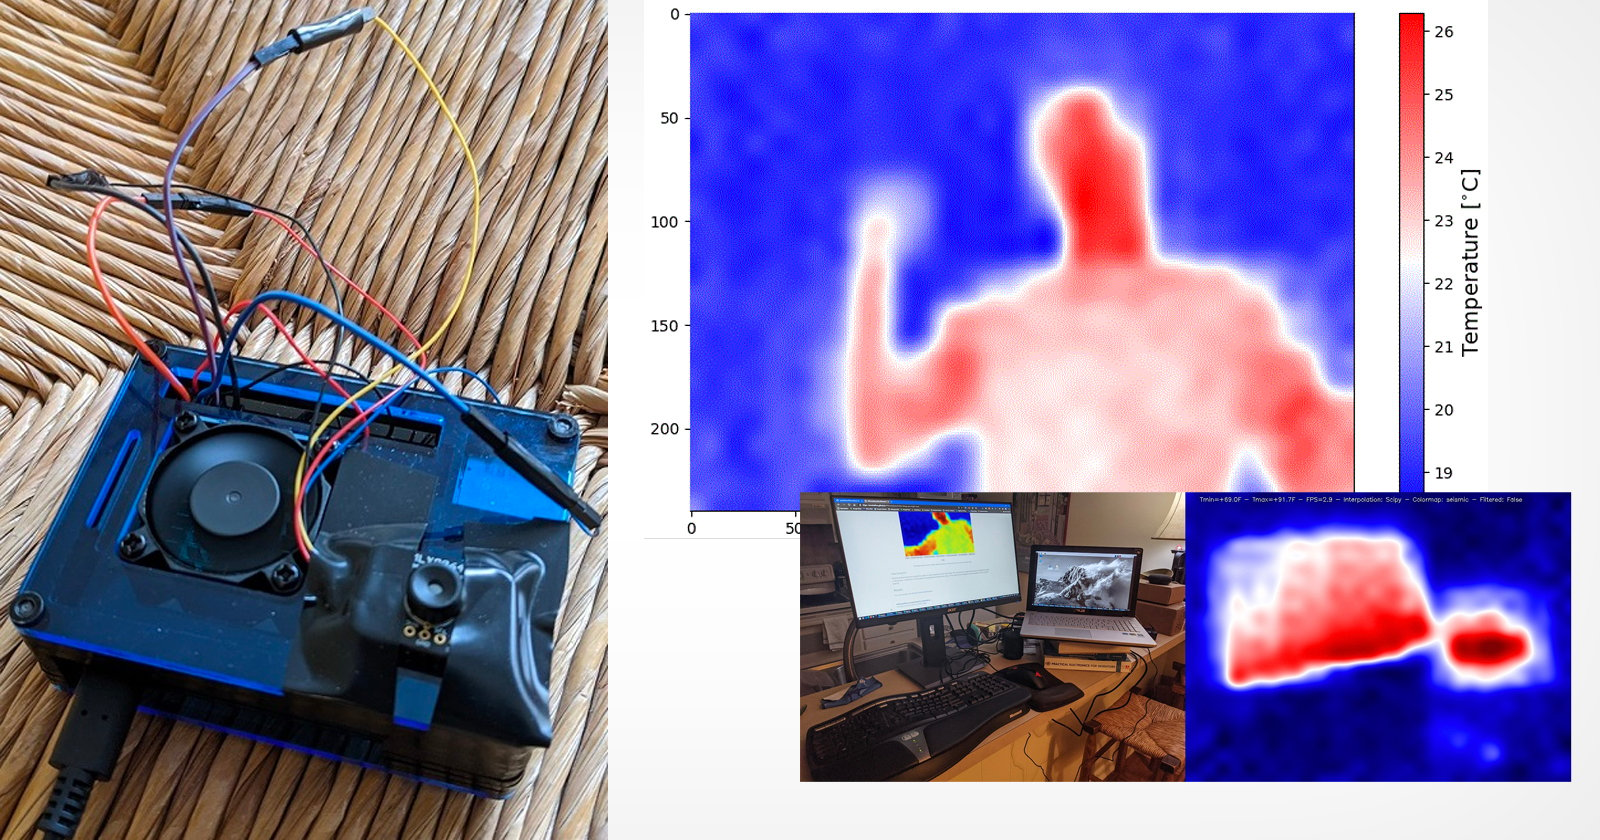 How to Build Your Own Thermal Camera With a Raspberry Pi